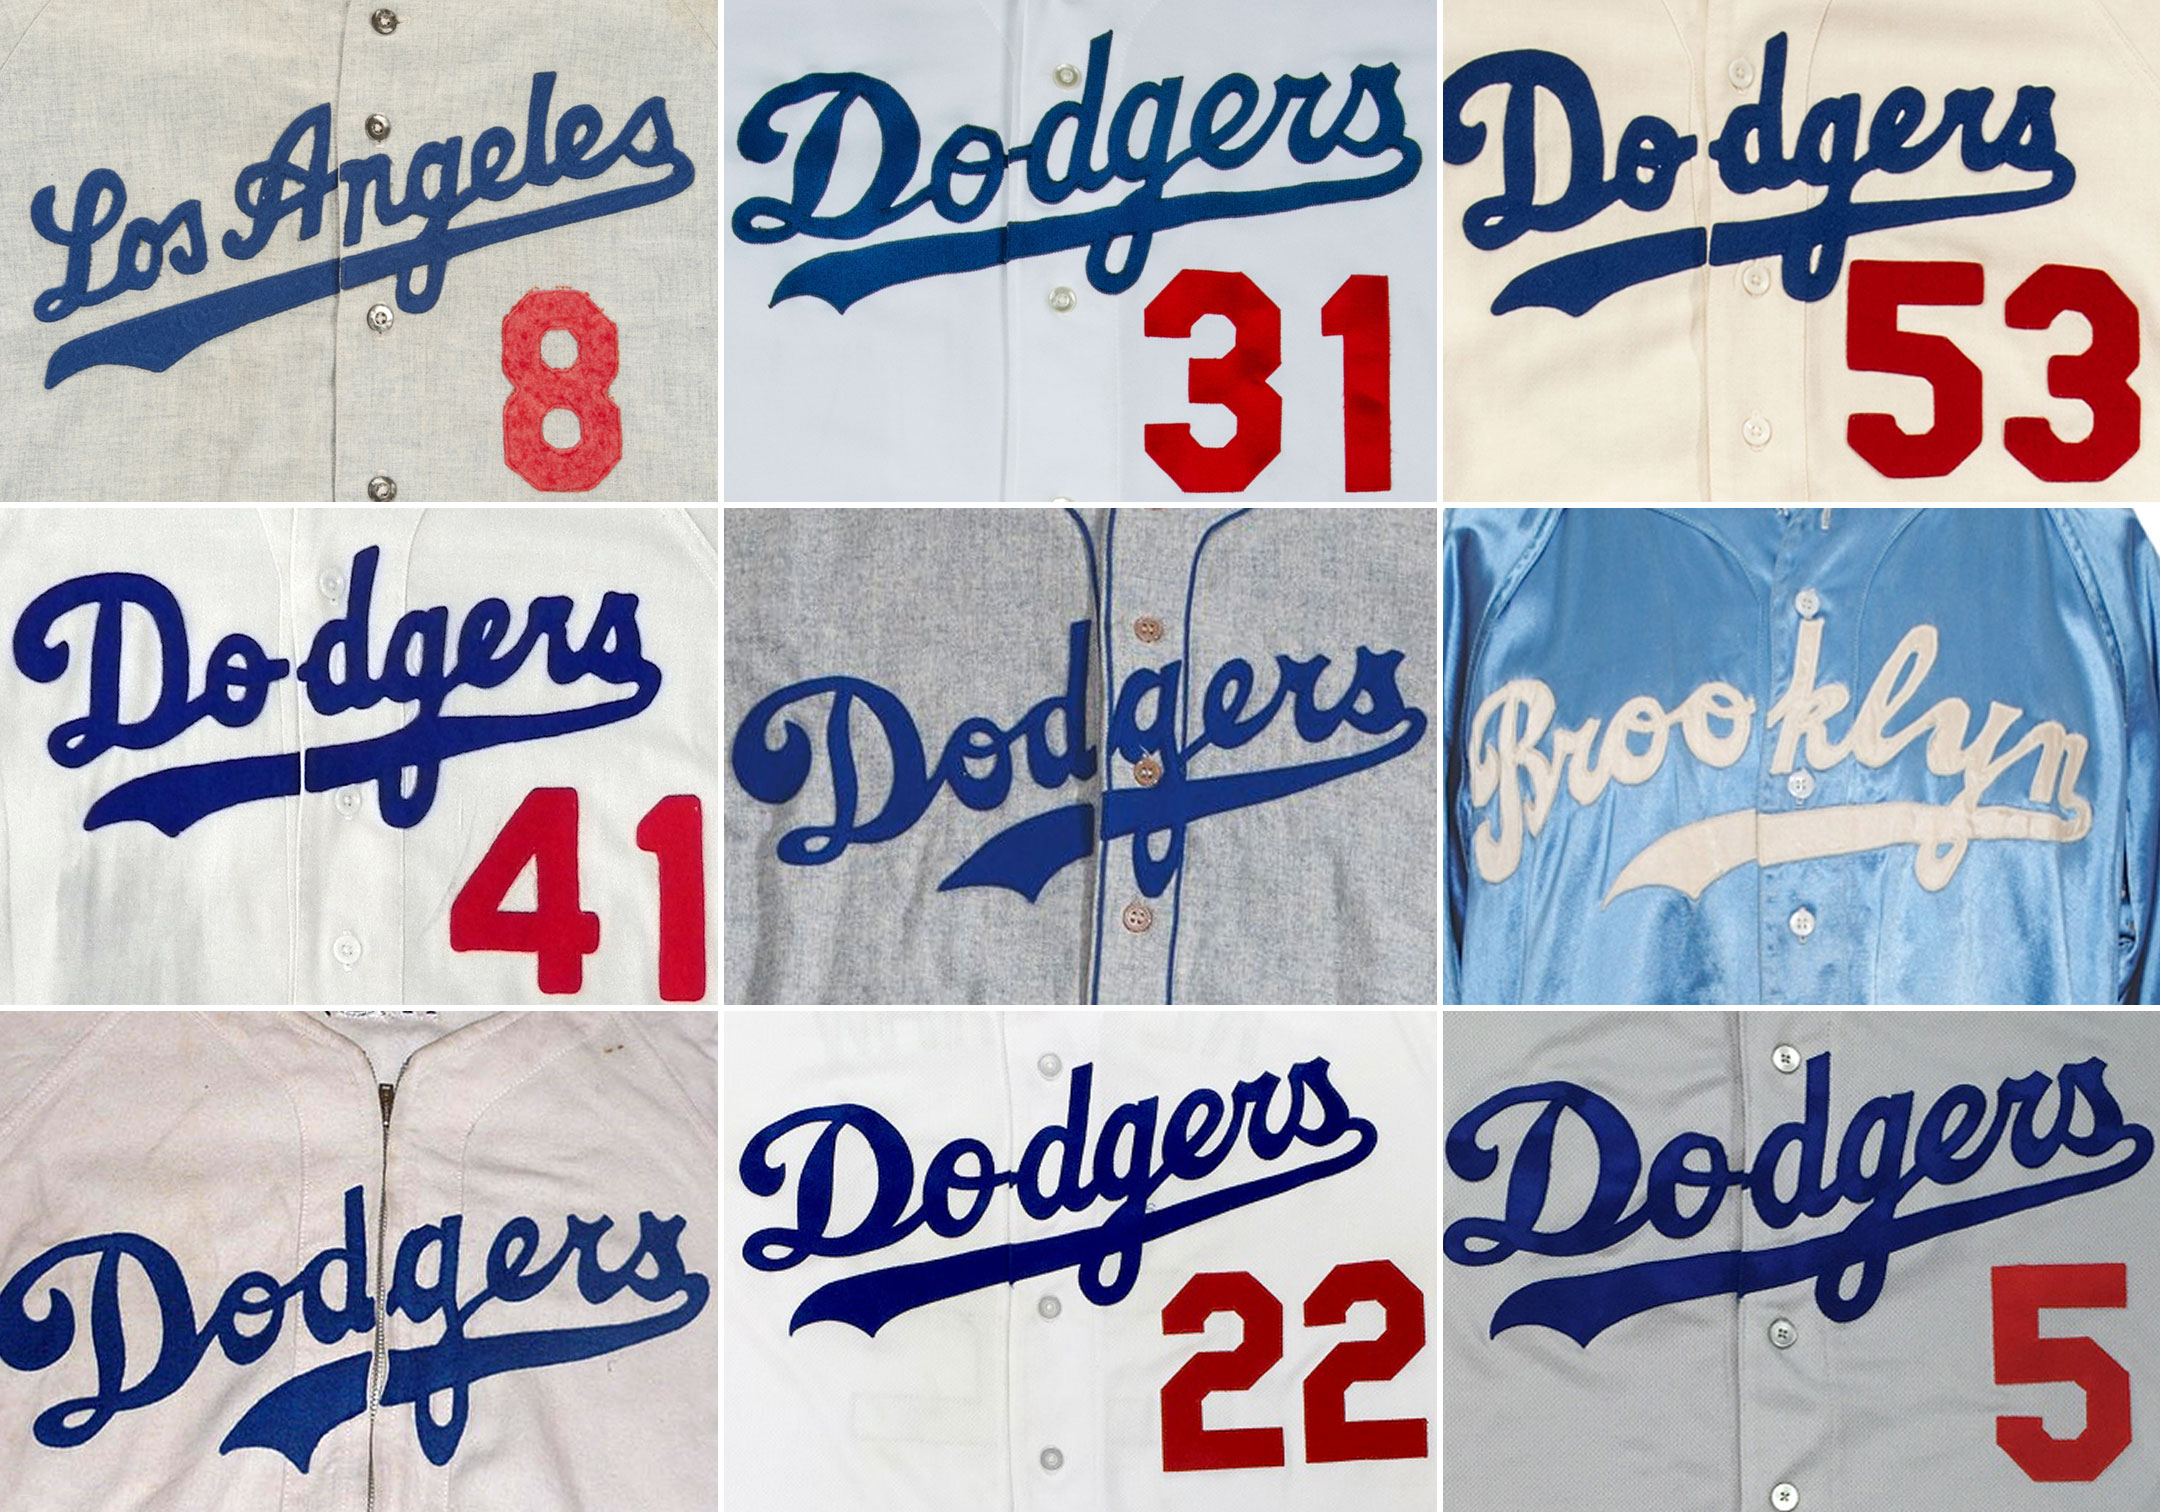 red white and green dodgers jersey